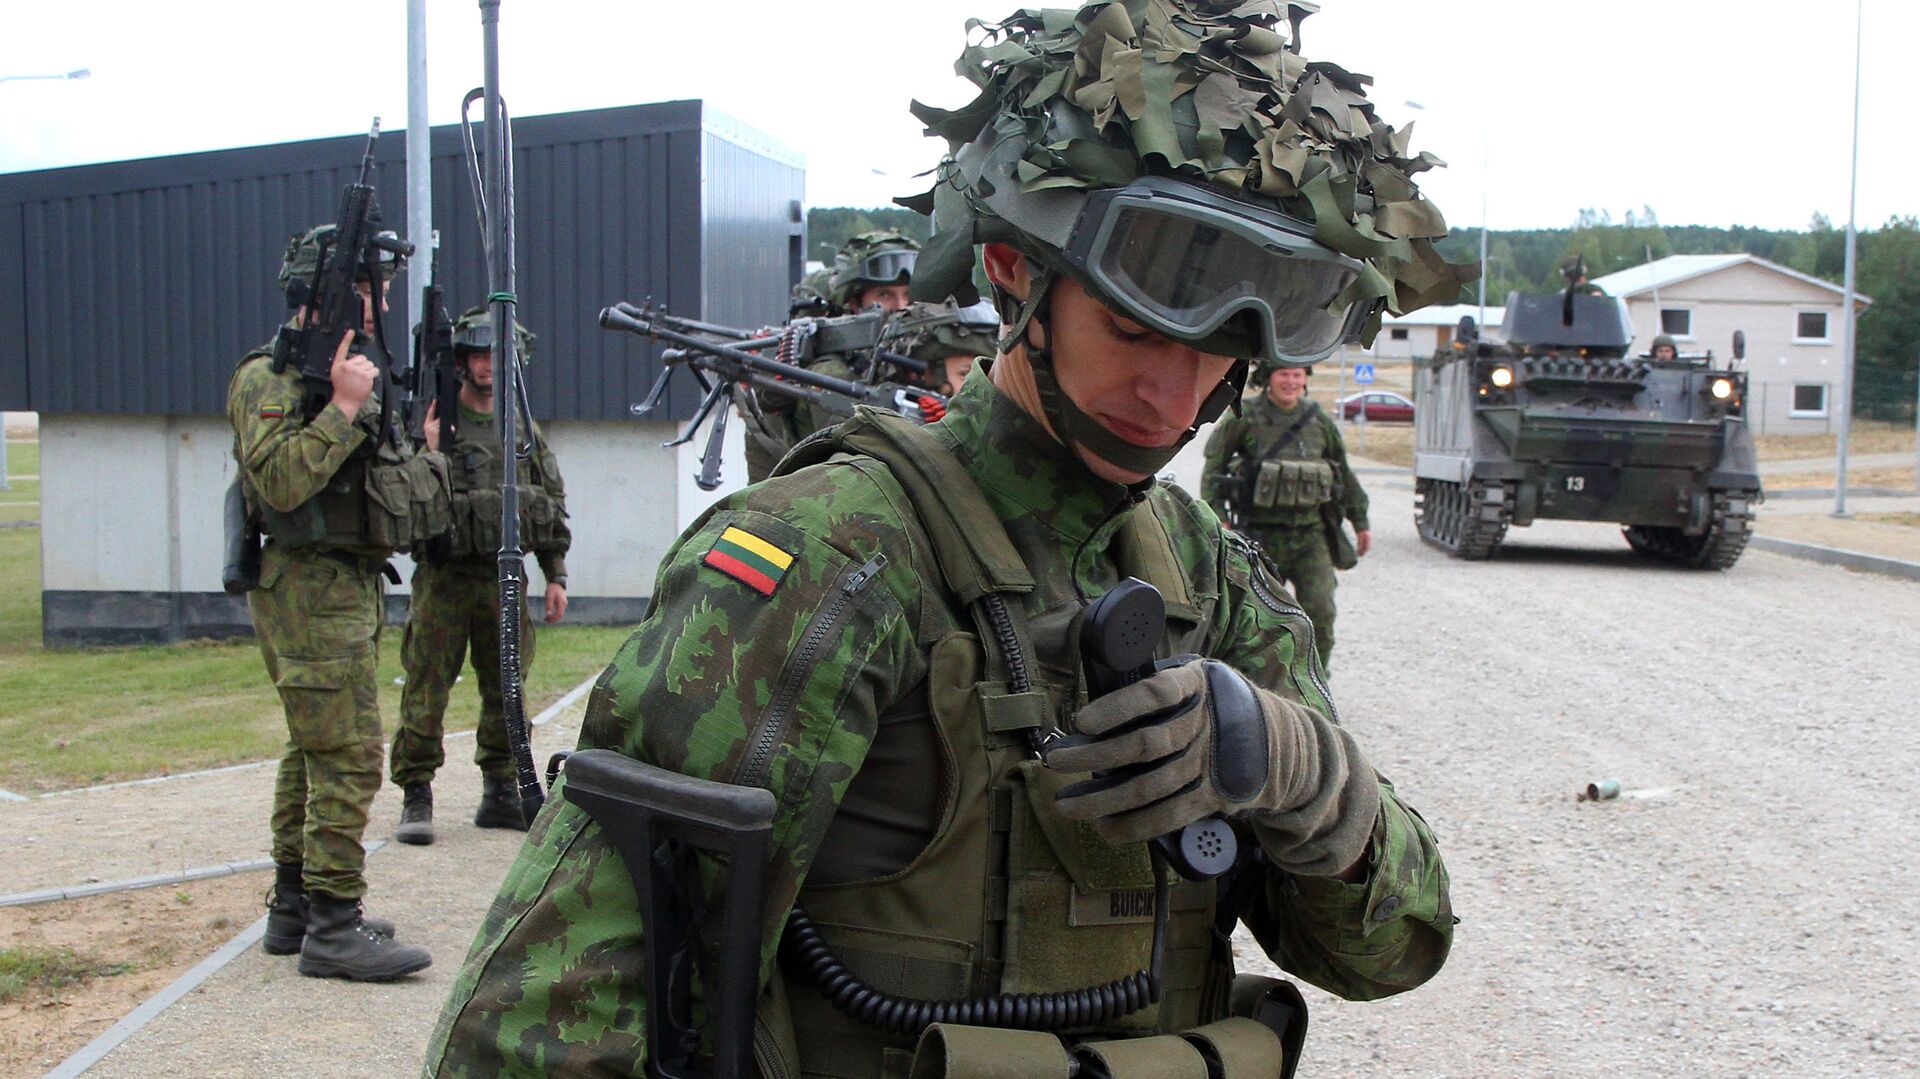 Lithuanian army soldiers take part in an exercise following the official opening of a military training centre for urban warfare in Pabrade, Lithuania, on August 30, 2016 - Sputnik International, 1920, 19.12.2021